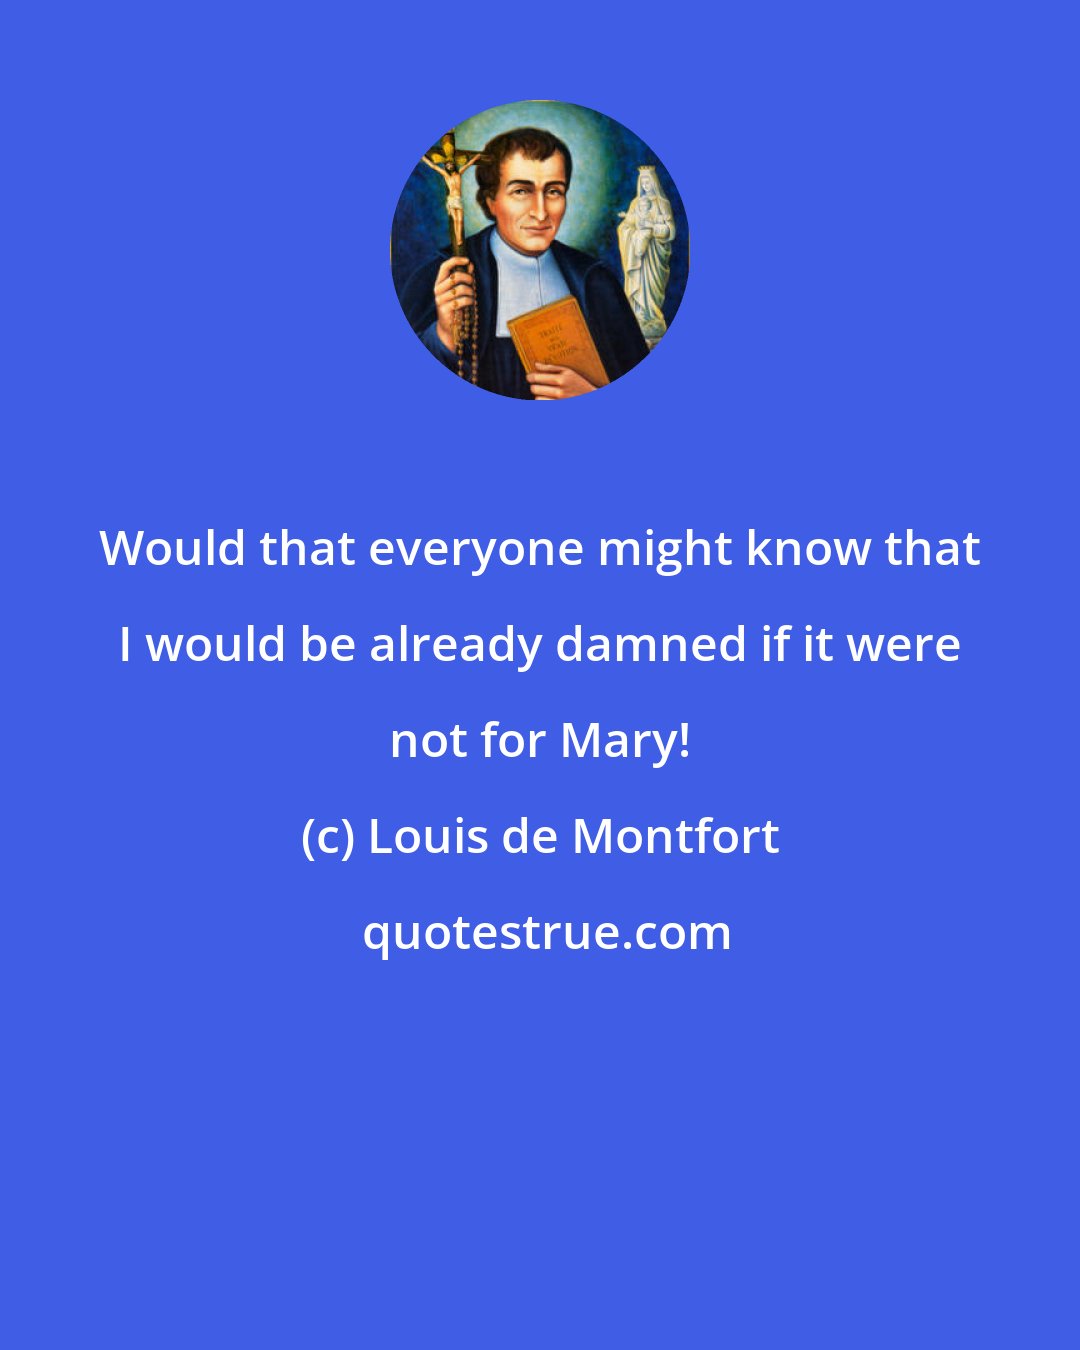 Louis de Montfort: Would that everyone might know that I would be already damned if it were not for Mary!